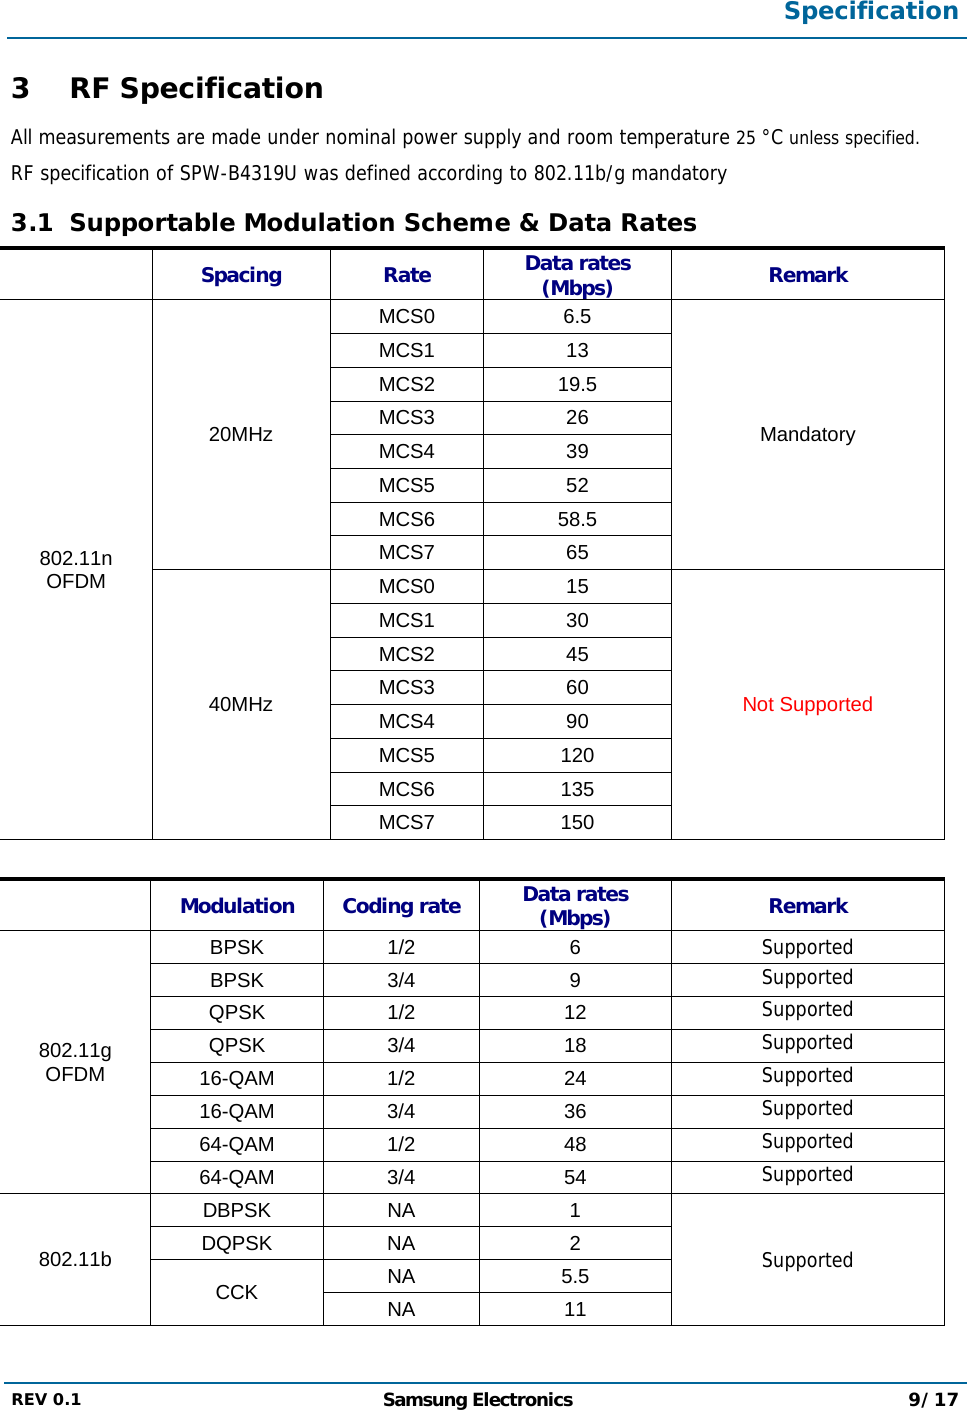  Specification  REV 0.1  Samsung Electronics 9/17  3 RF Specification All measurements are made under nominal power supply and room temperature 25 °C unless specified. RF specification of SPW-B4319U was defined according to 802.11b/g mandatory  3.1 Supportable Modulation Scheme &amp; Data Rates  Spacing Rate Data rates (Mbps)  Remark 802.11n OFDM 20MHz MCS0 6.5 Mandatory MCS1 13 MCS2 19.5 MCS3 26 MCS4 39 MCS5 52 MCS6 58.5 MCS7 65 40MHz MCS0 15 Not Supported MCS1 30 MCS2 45 MCS3 60 MCS4 90 MCS5 120 MCS6 135 MCS7 150   Modulation Coding rate Data rates (Mbps)  Remark 802.11g OFDM BPSK 1/2  6  Supported BPSK 3/4  9  Supported QPSK 1/2  12  Supported QPSK 3/4  18  Supported 16-QAM 1/2  24  Supported 16-QAM 3/4  36  Supported 64-QAM 1/2  48  Supported 64-QAM 3/4  54  Supported 802.11b DBPSK NA  1 Supported DQPSK NA  2 CCK  NA 5.5 NA 11 